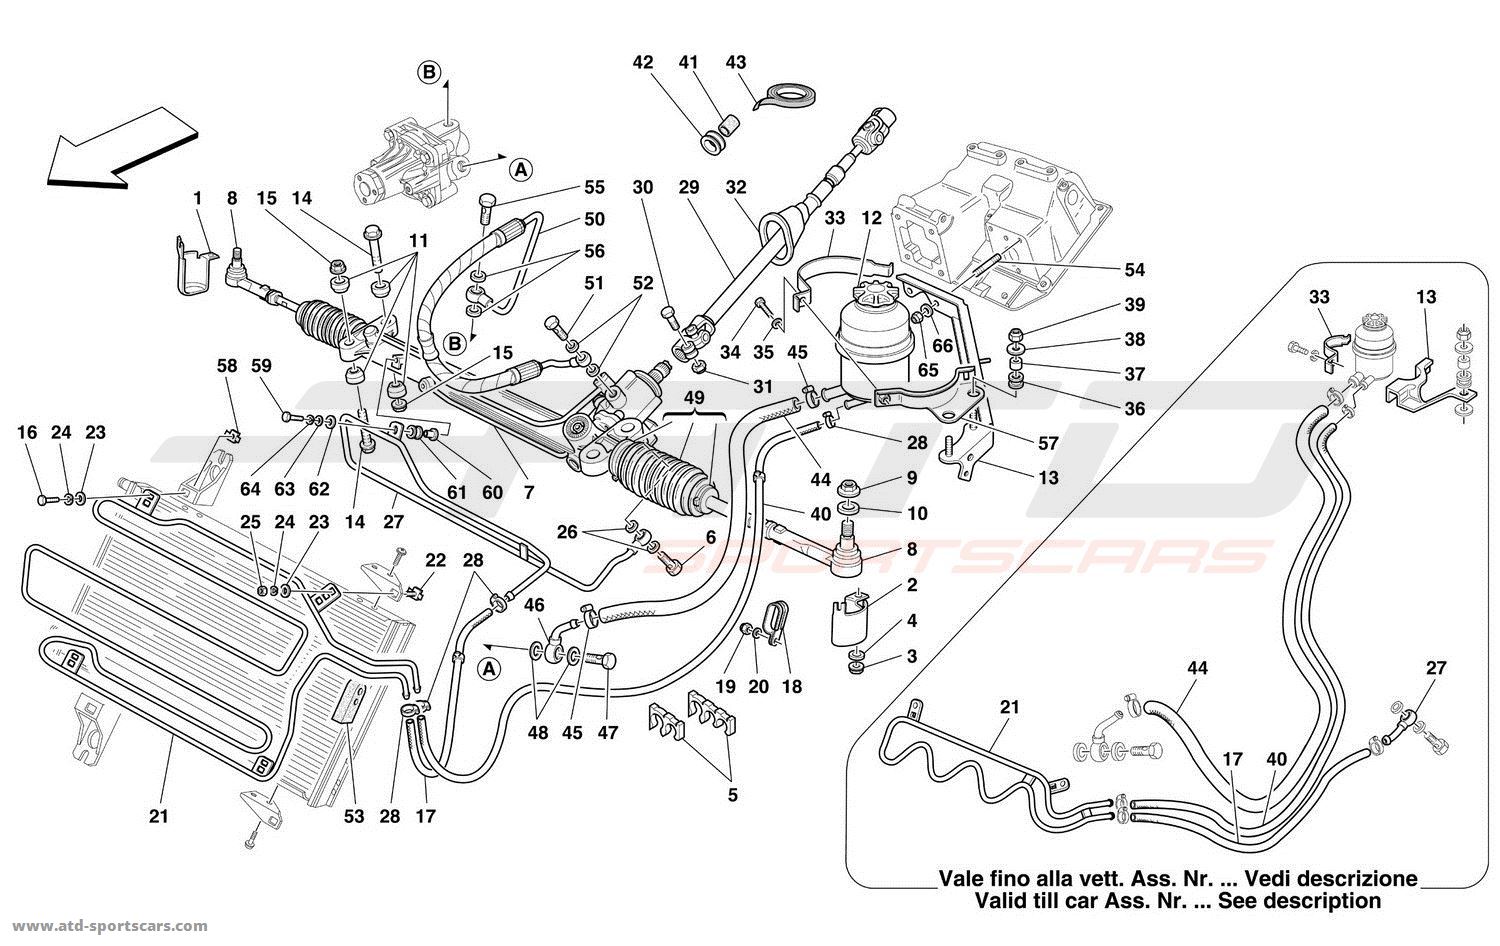 HYDRAULIC STEERING BOX AND SERPENTINE